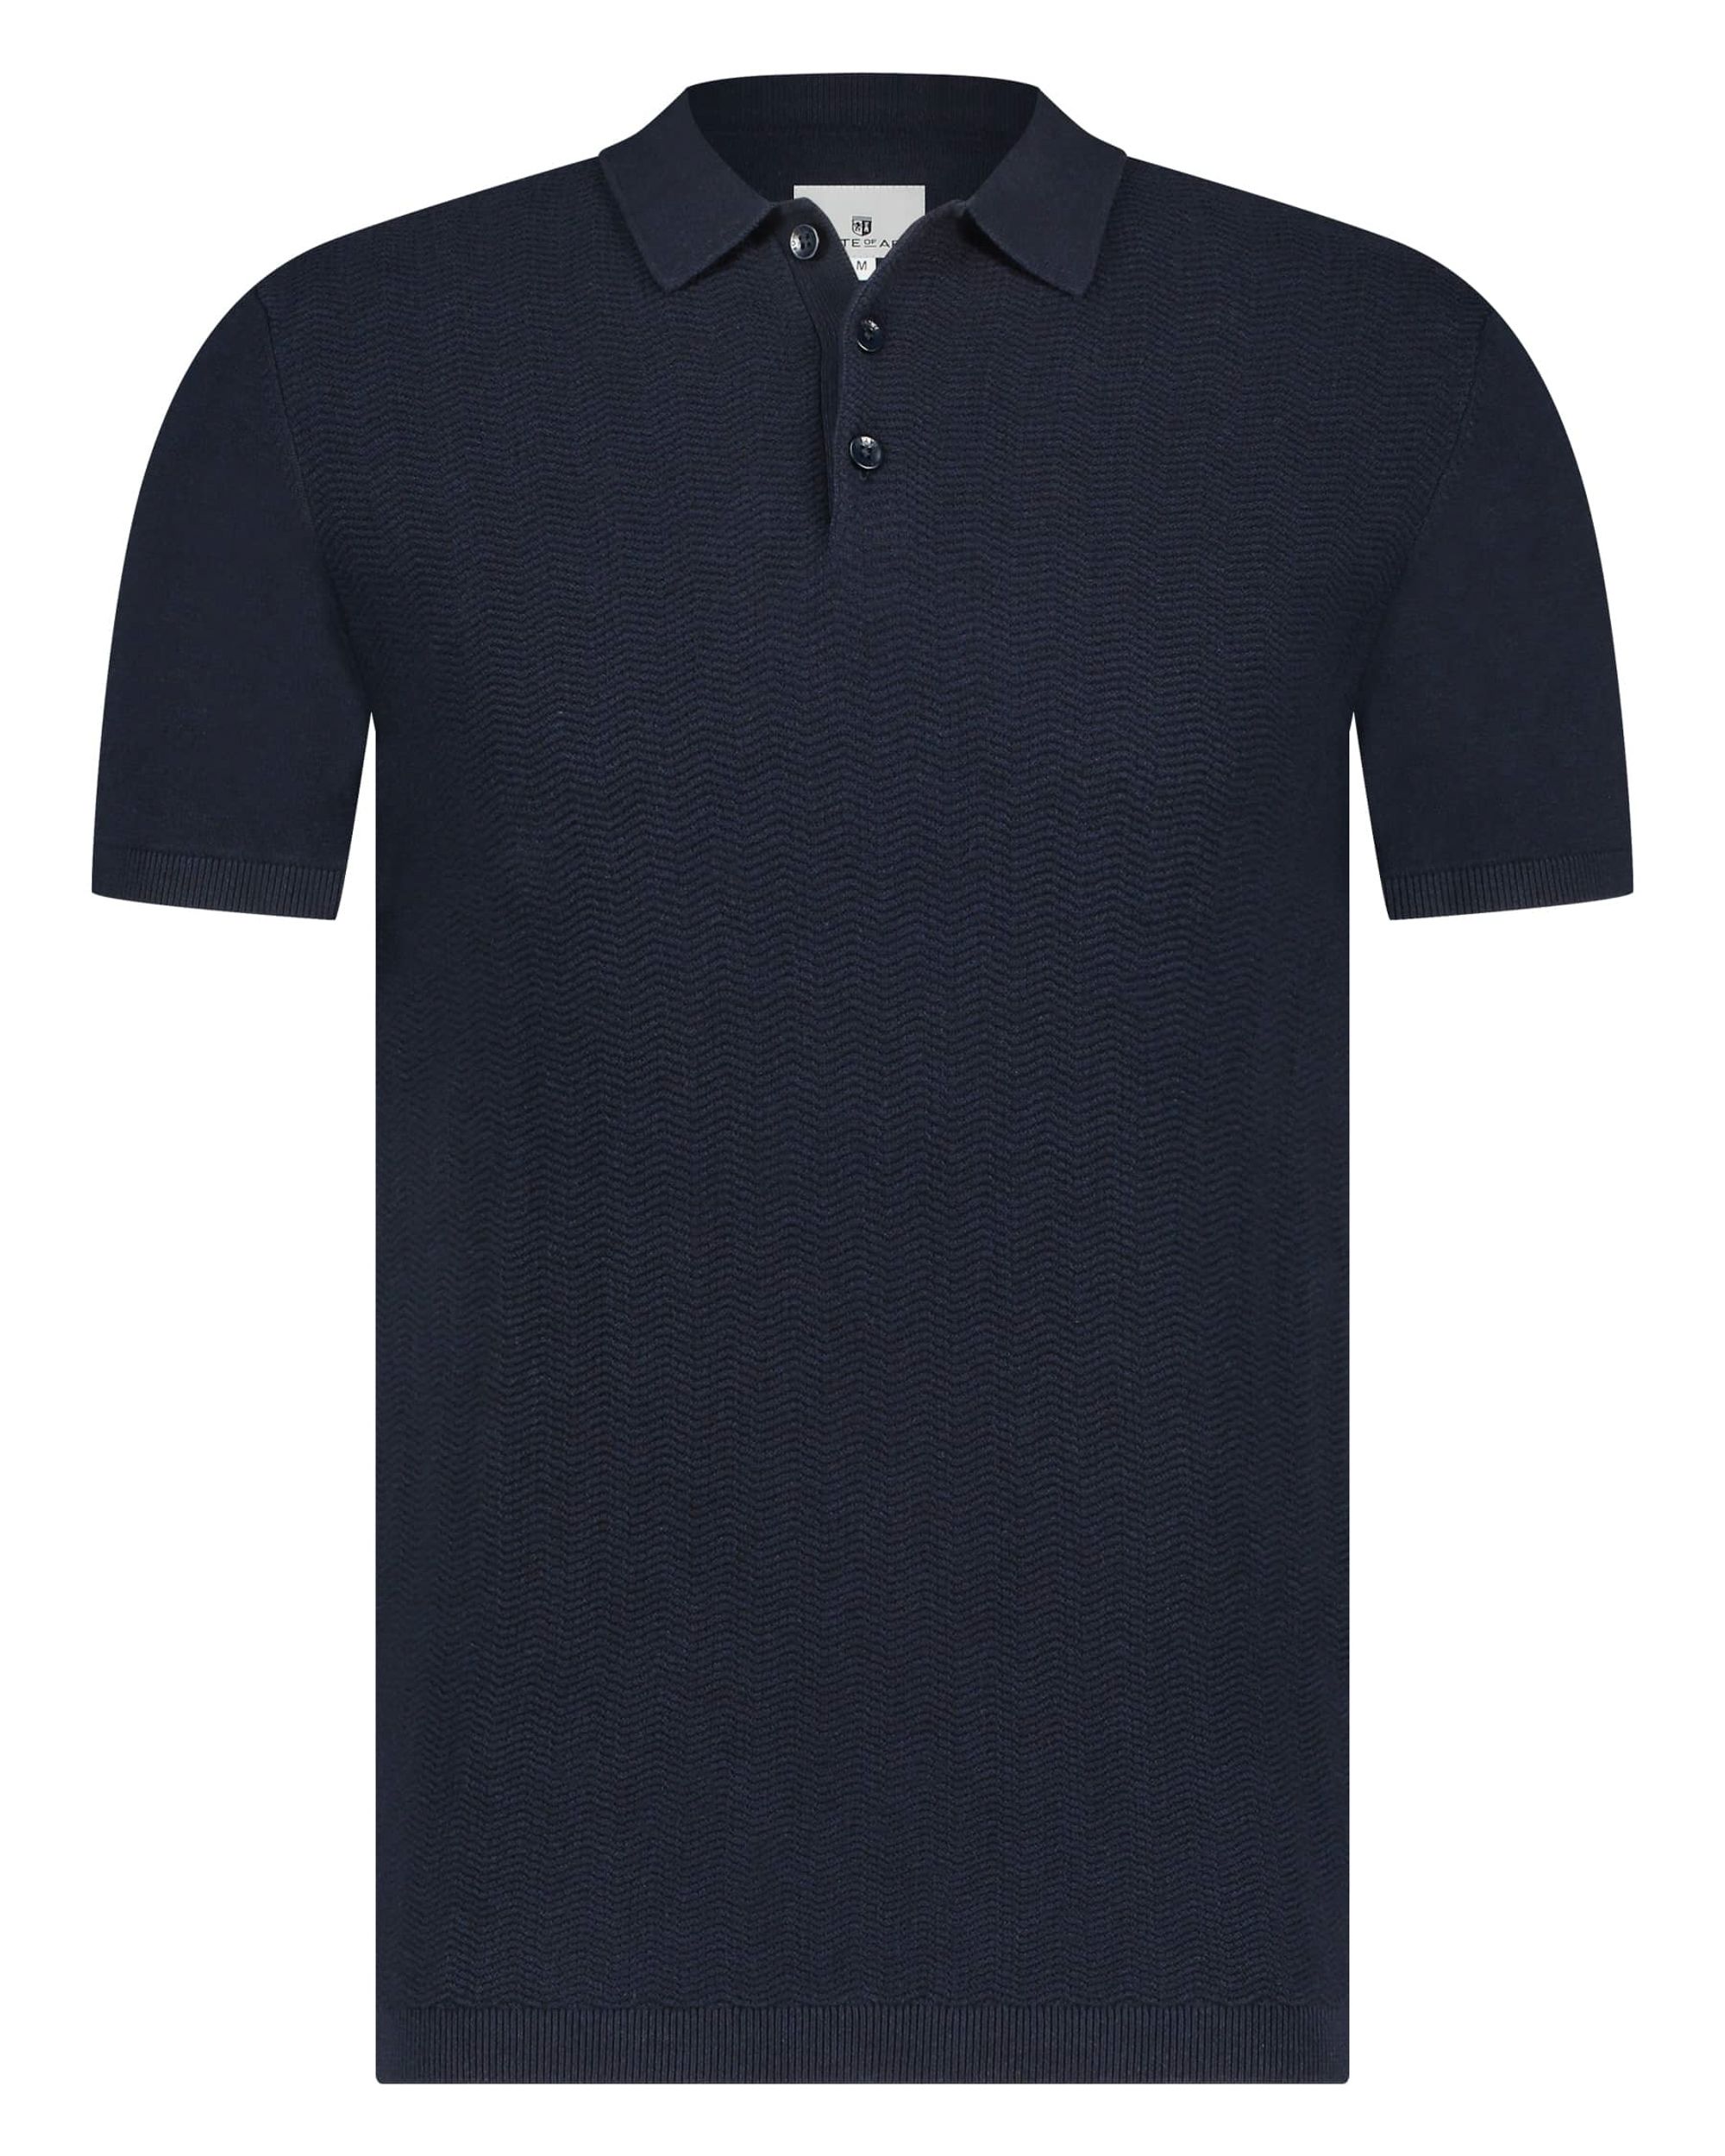 State of Art Polo KM Donker blauw 095071-001-4XL